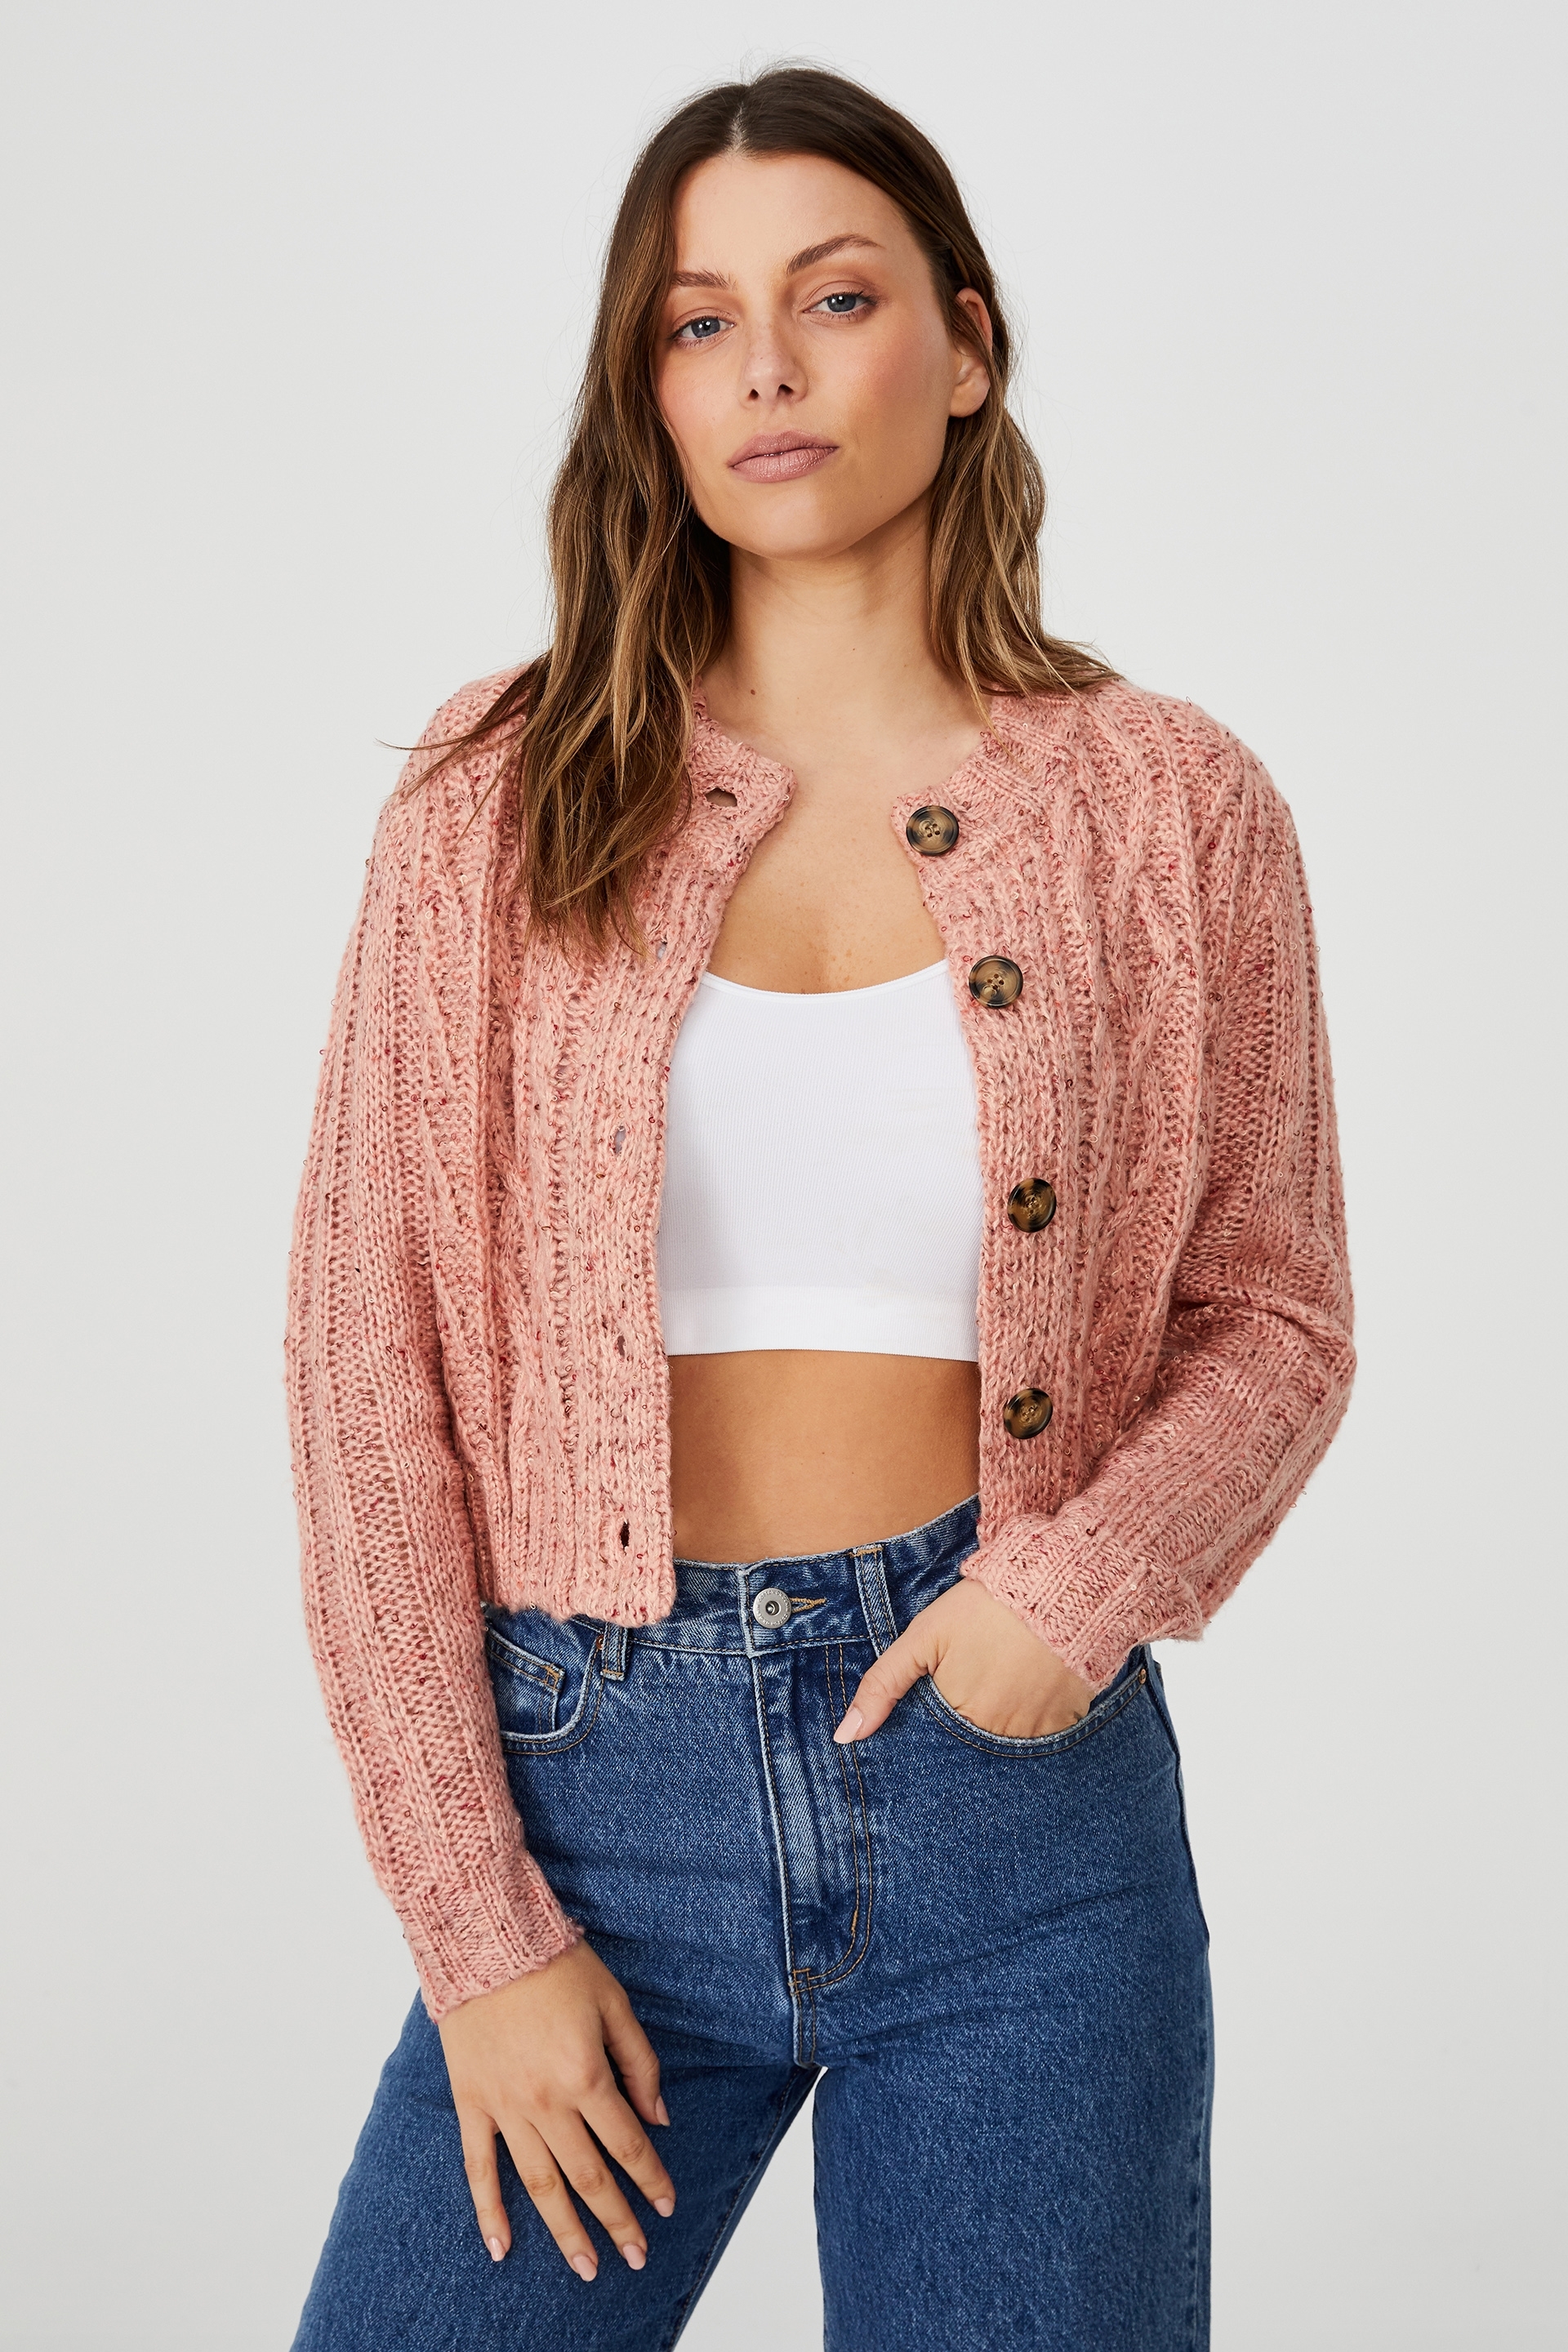 Cotton On Women - In The Mix Cabin Cable Crew Cardigan - Dusty pink